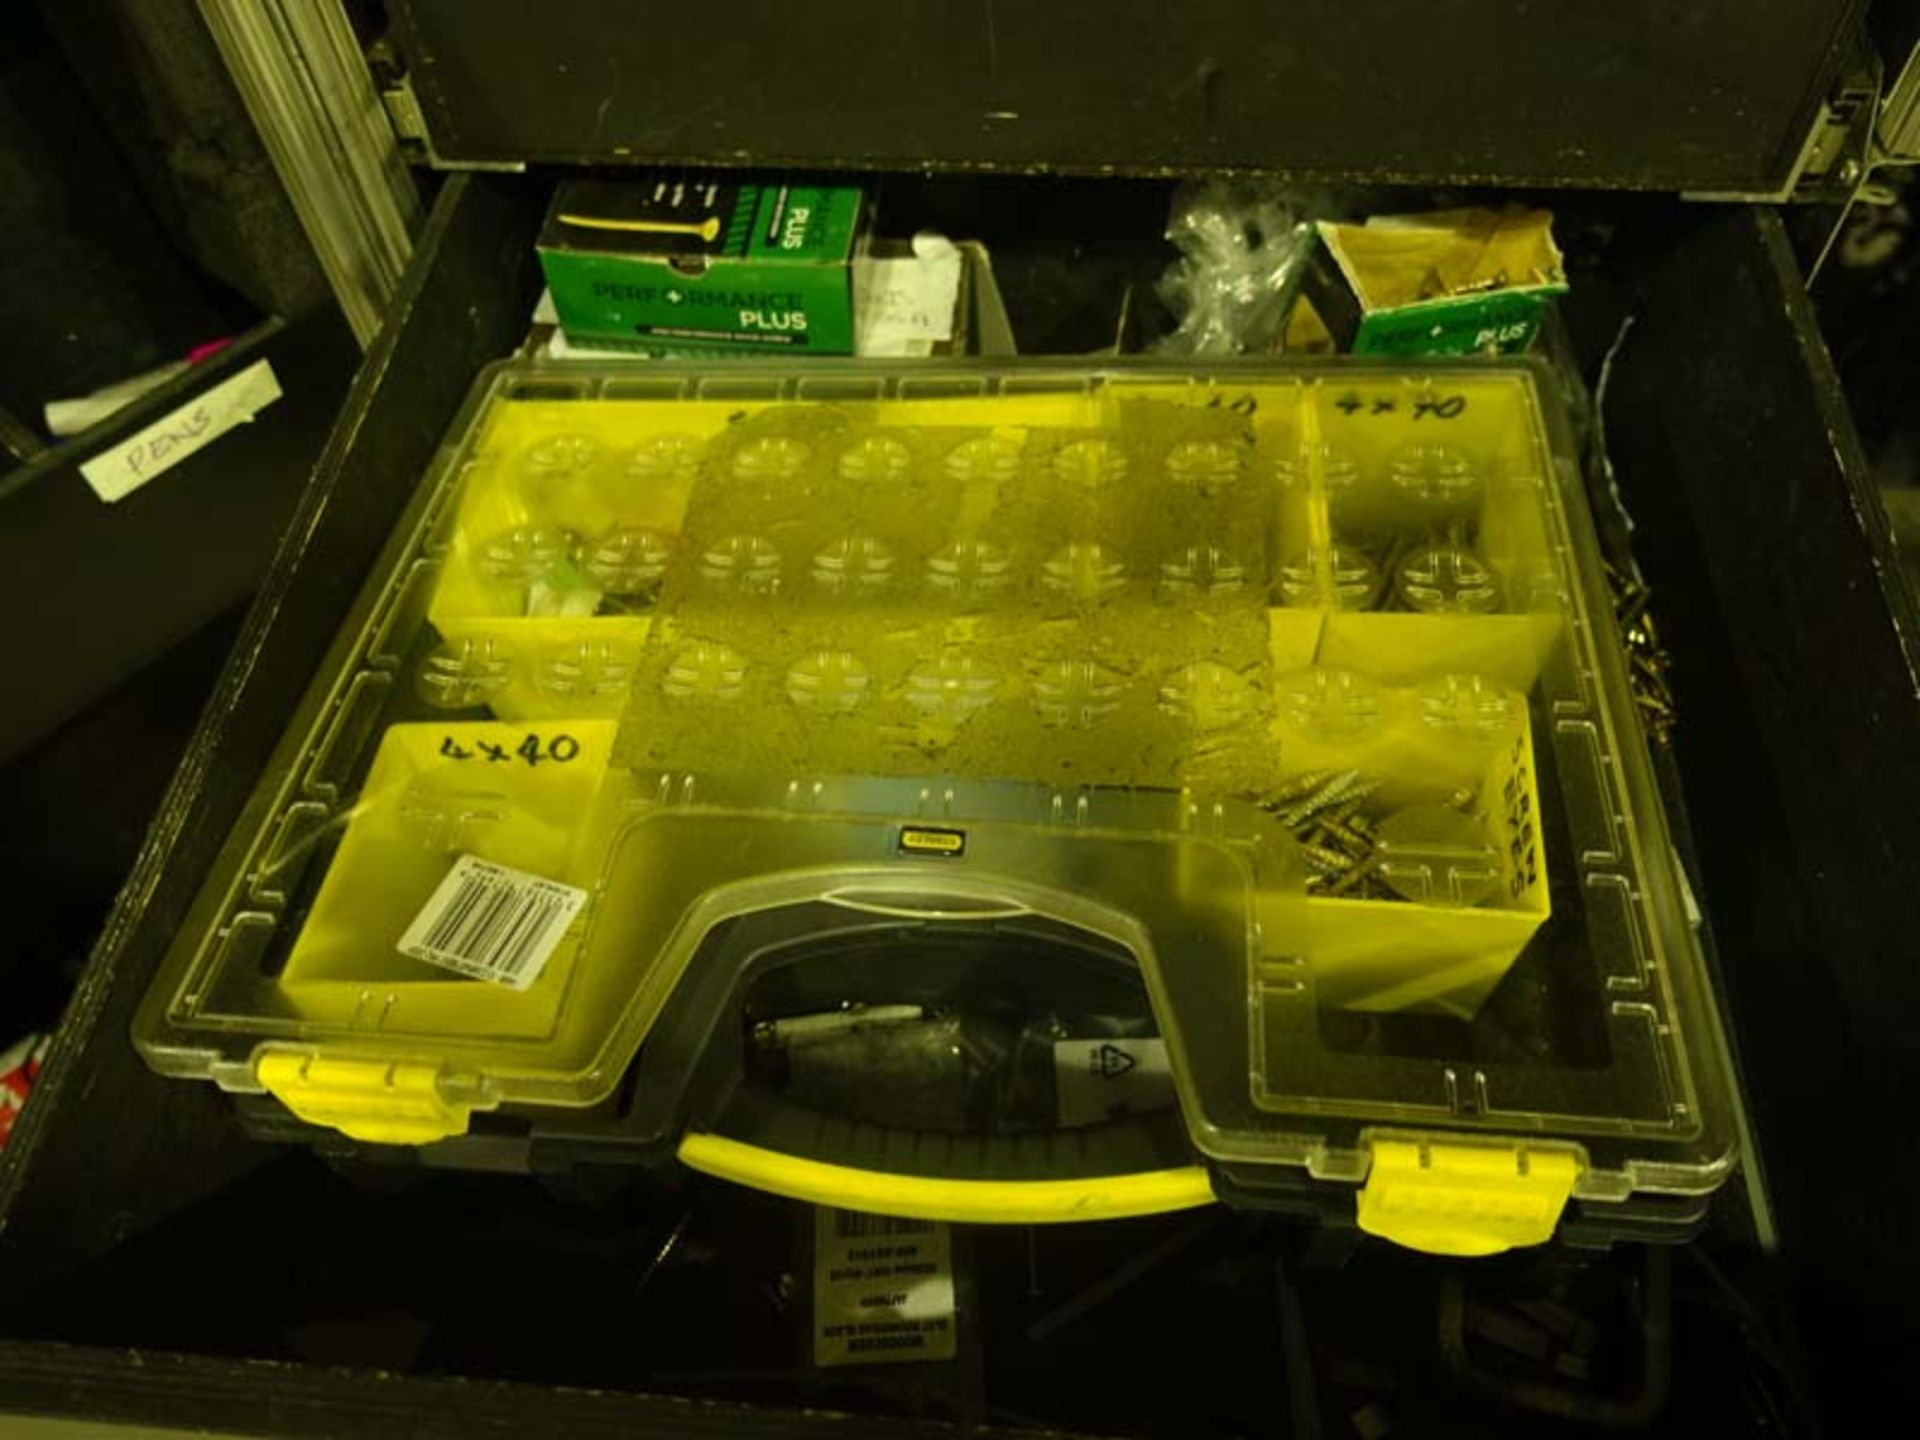 Wheeled freight case containing Production Box Equipment including hand tools, fixings, tape, clamps - Image 5 of 6